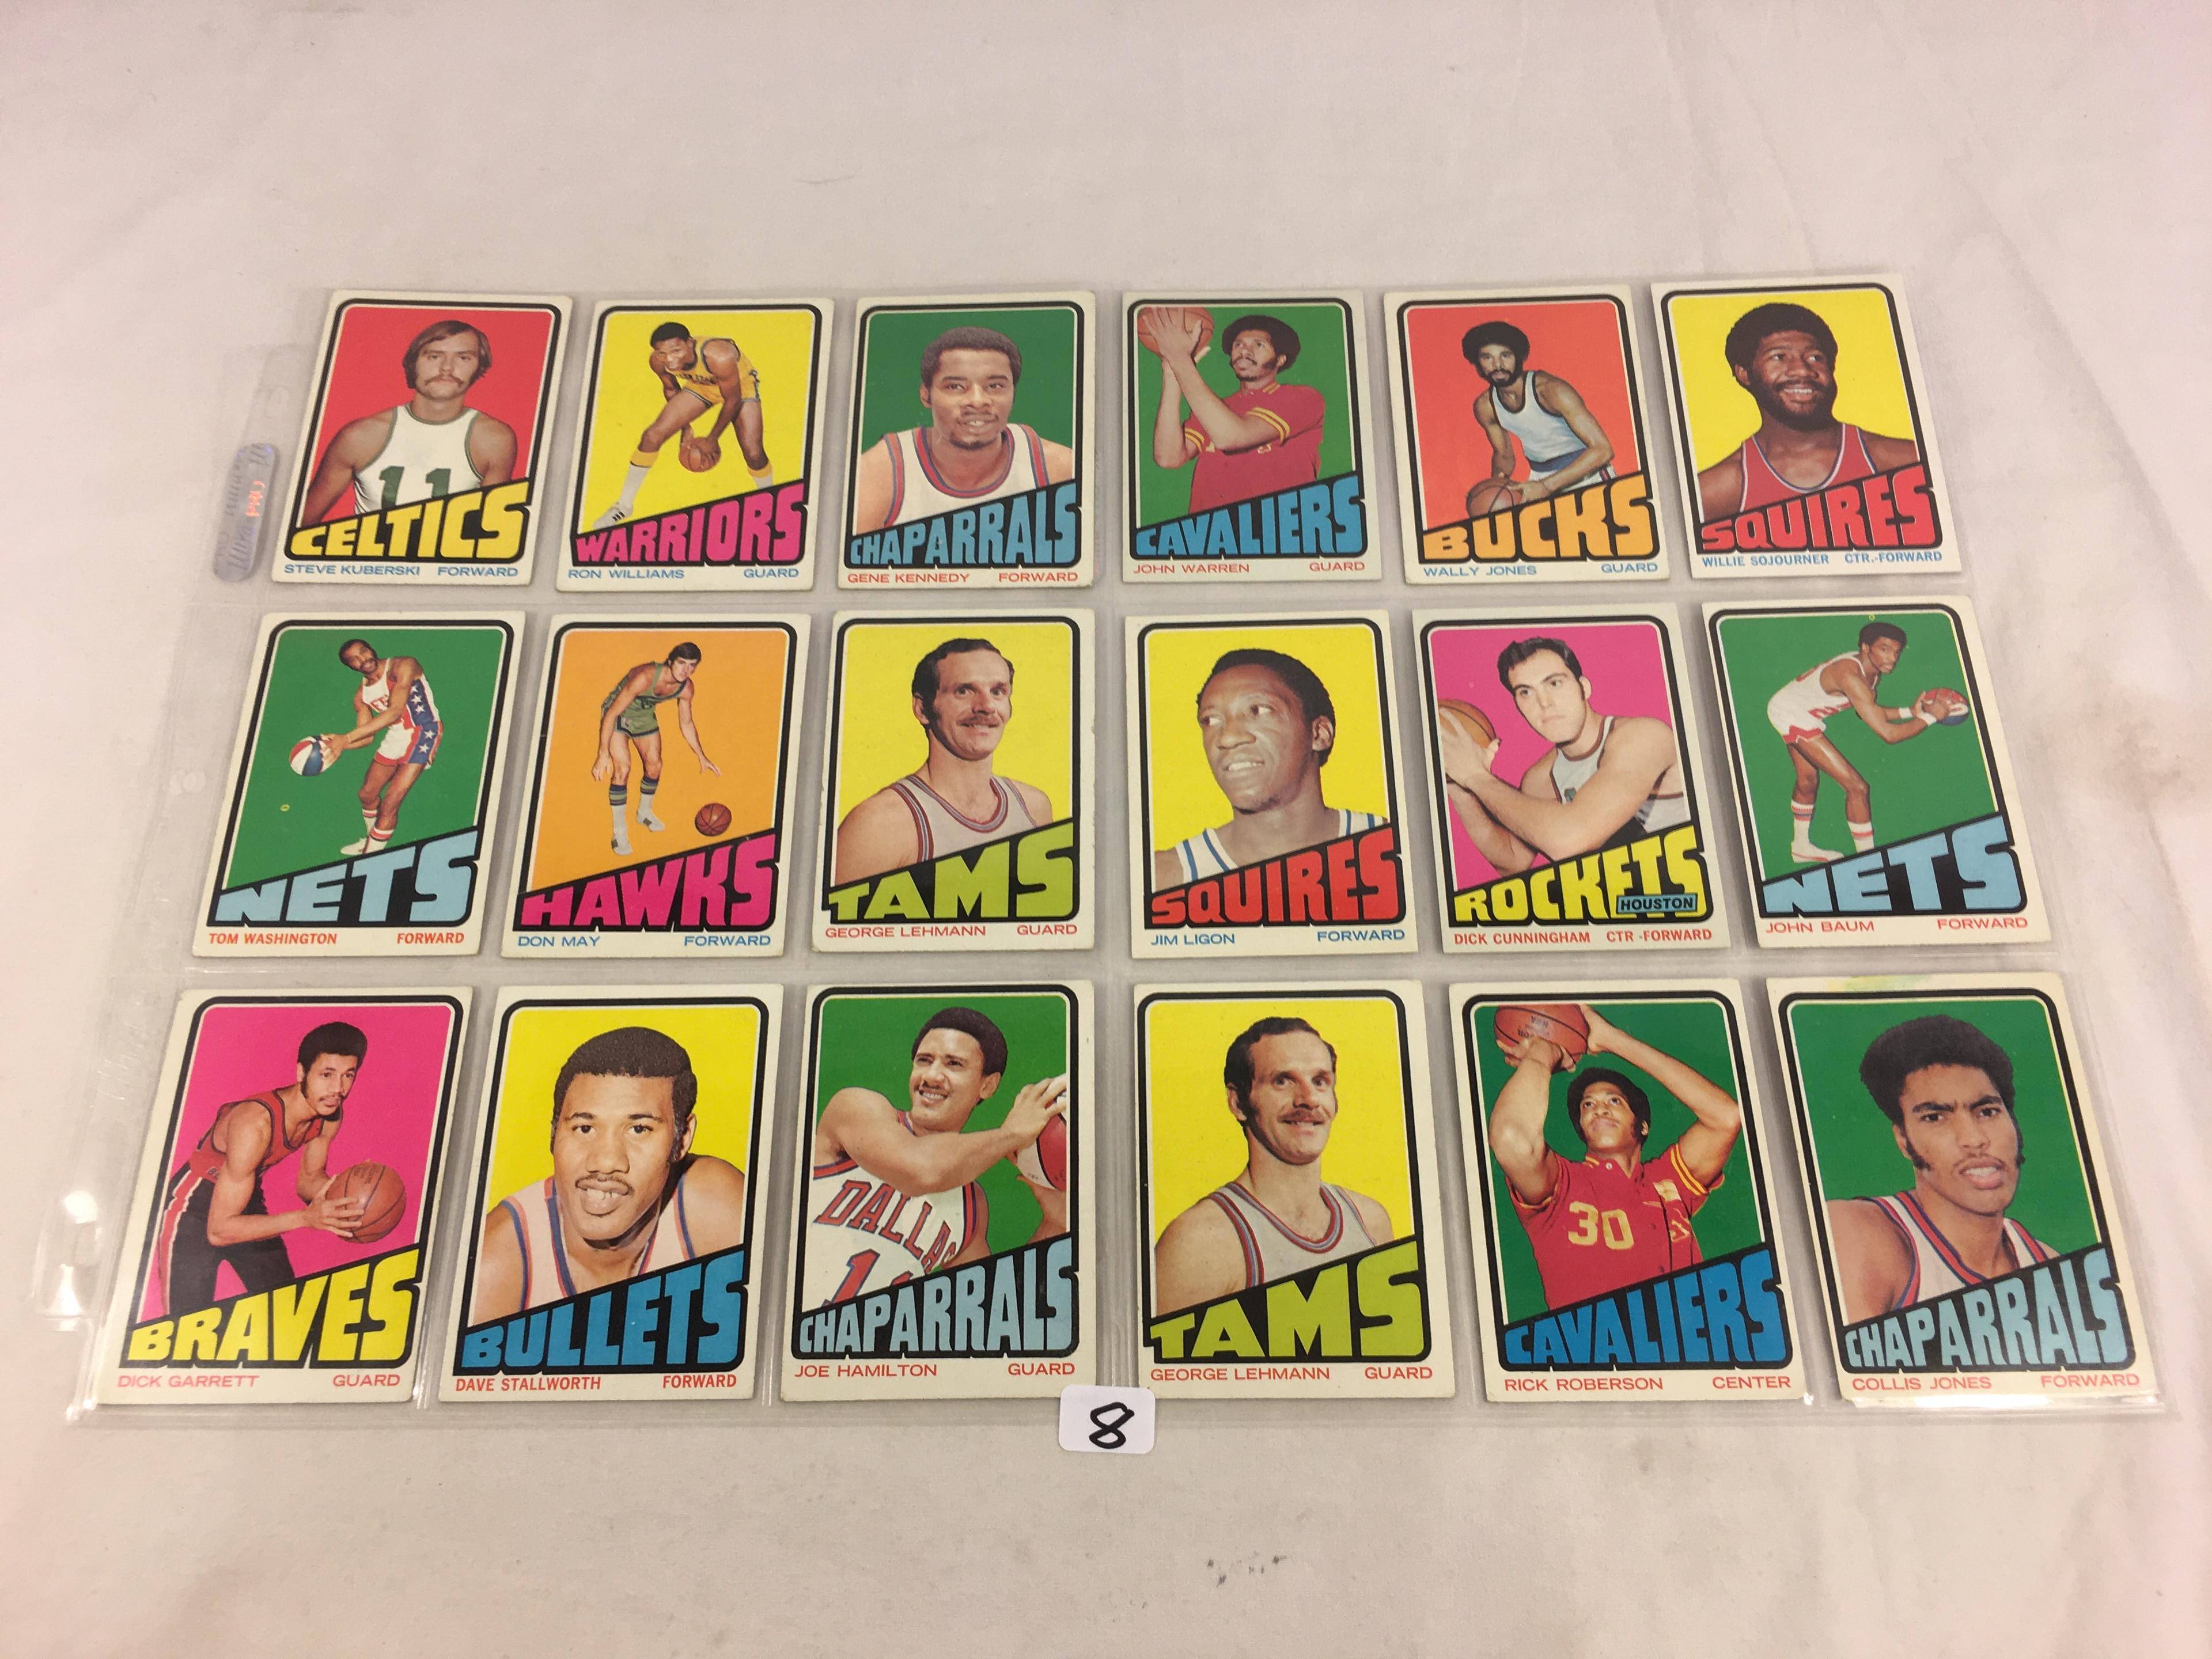 Lot of 18 Pcs Collector Vintage Sport NBA Basketball Sport Cards Assorted Players & Cards